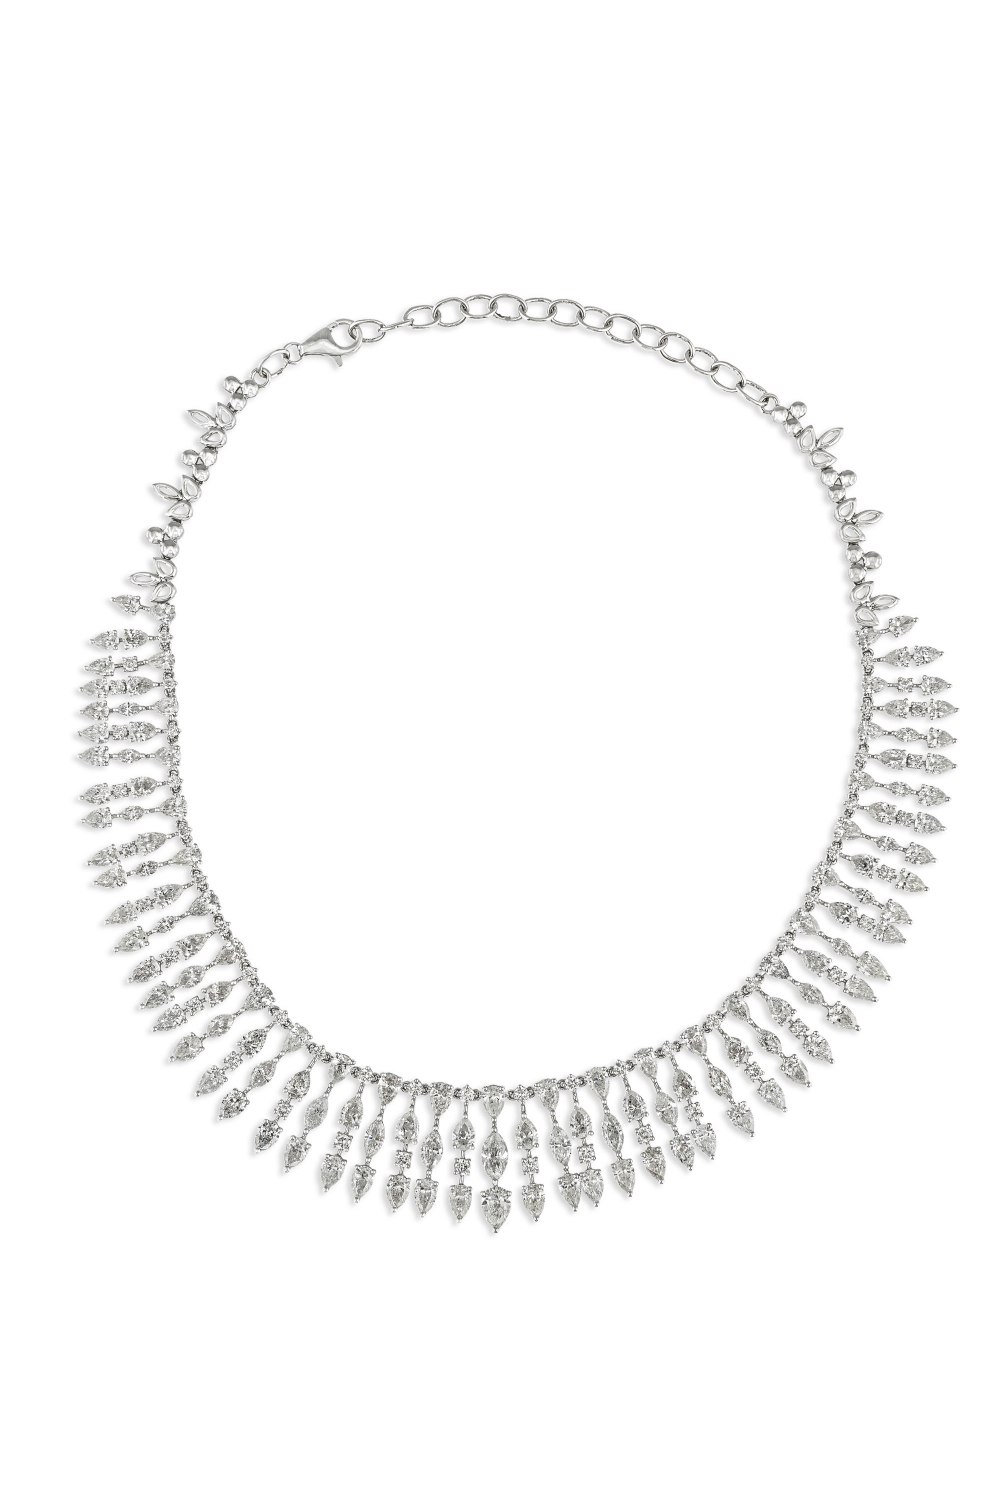 Marquise and Brilliant Cut Diamond Necklace 